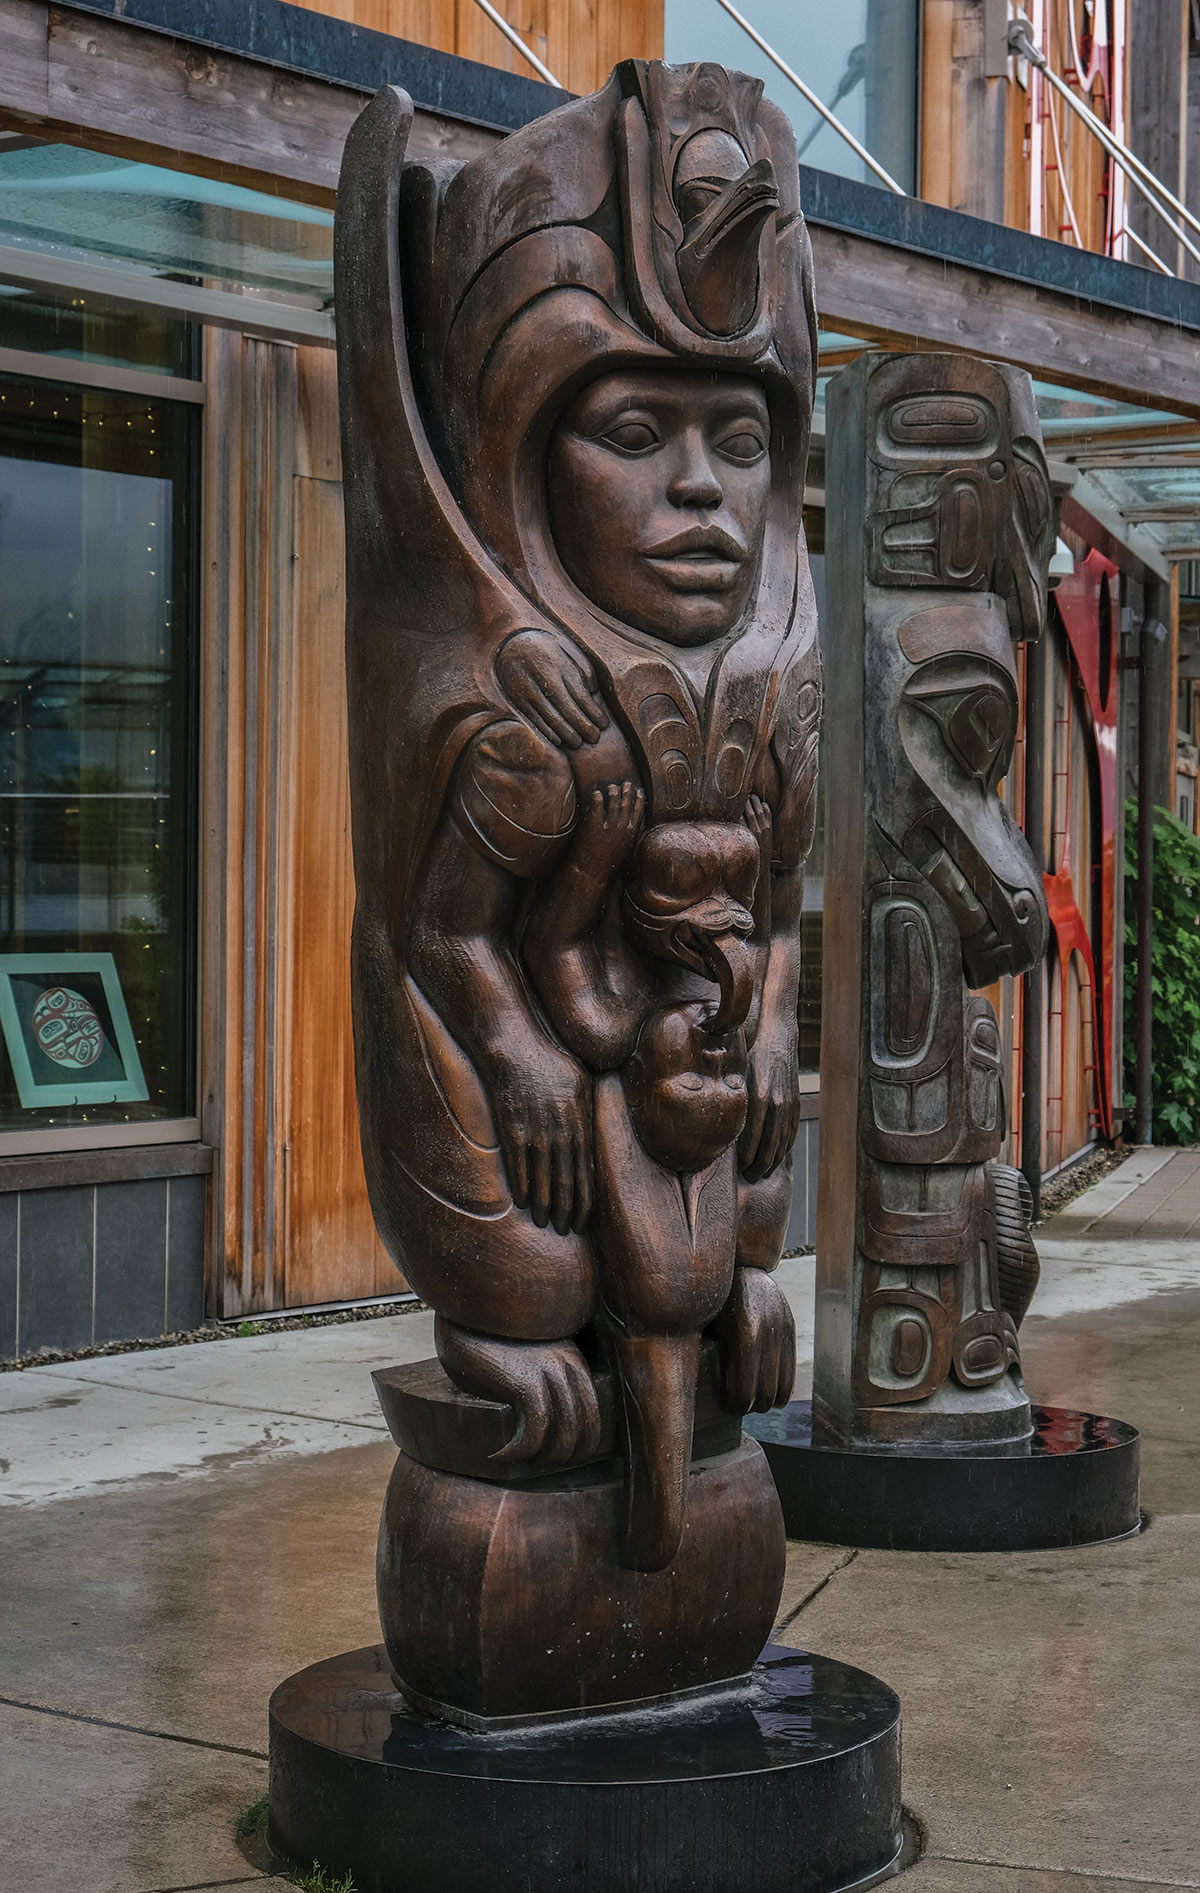 Bronze copies of wooden totem poles outside the Walter Soboleff Building